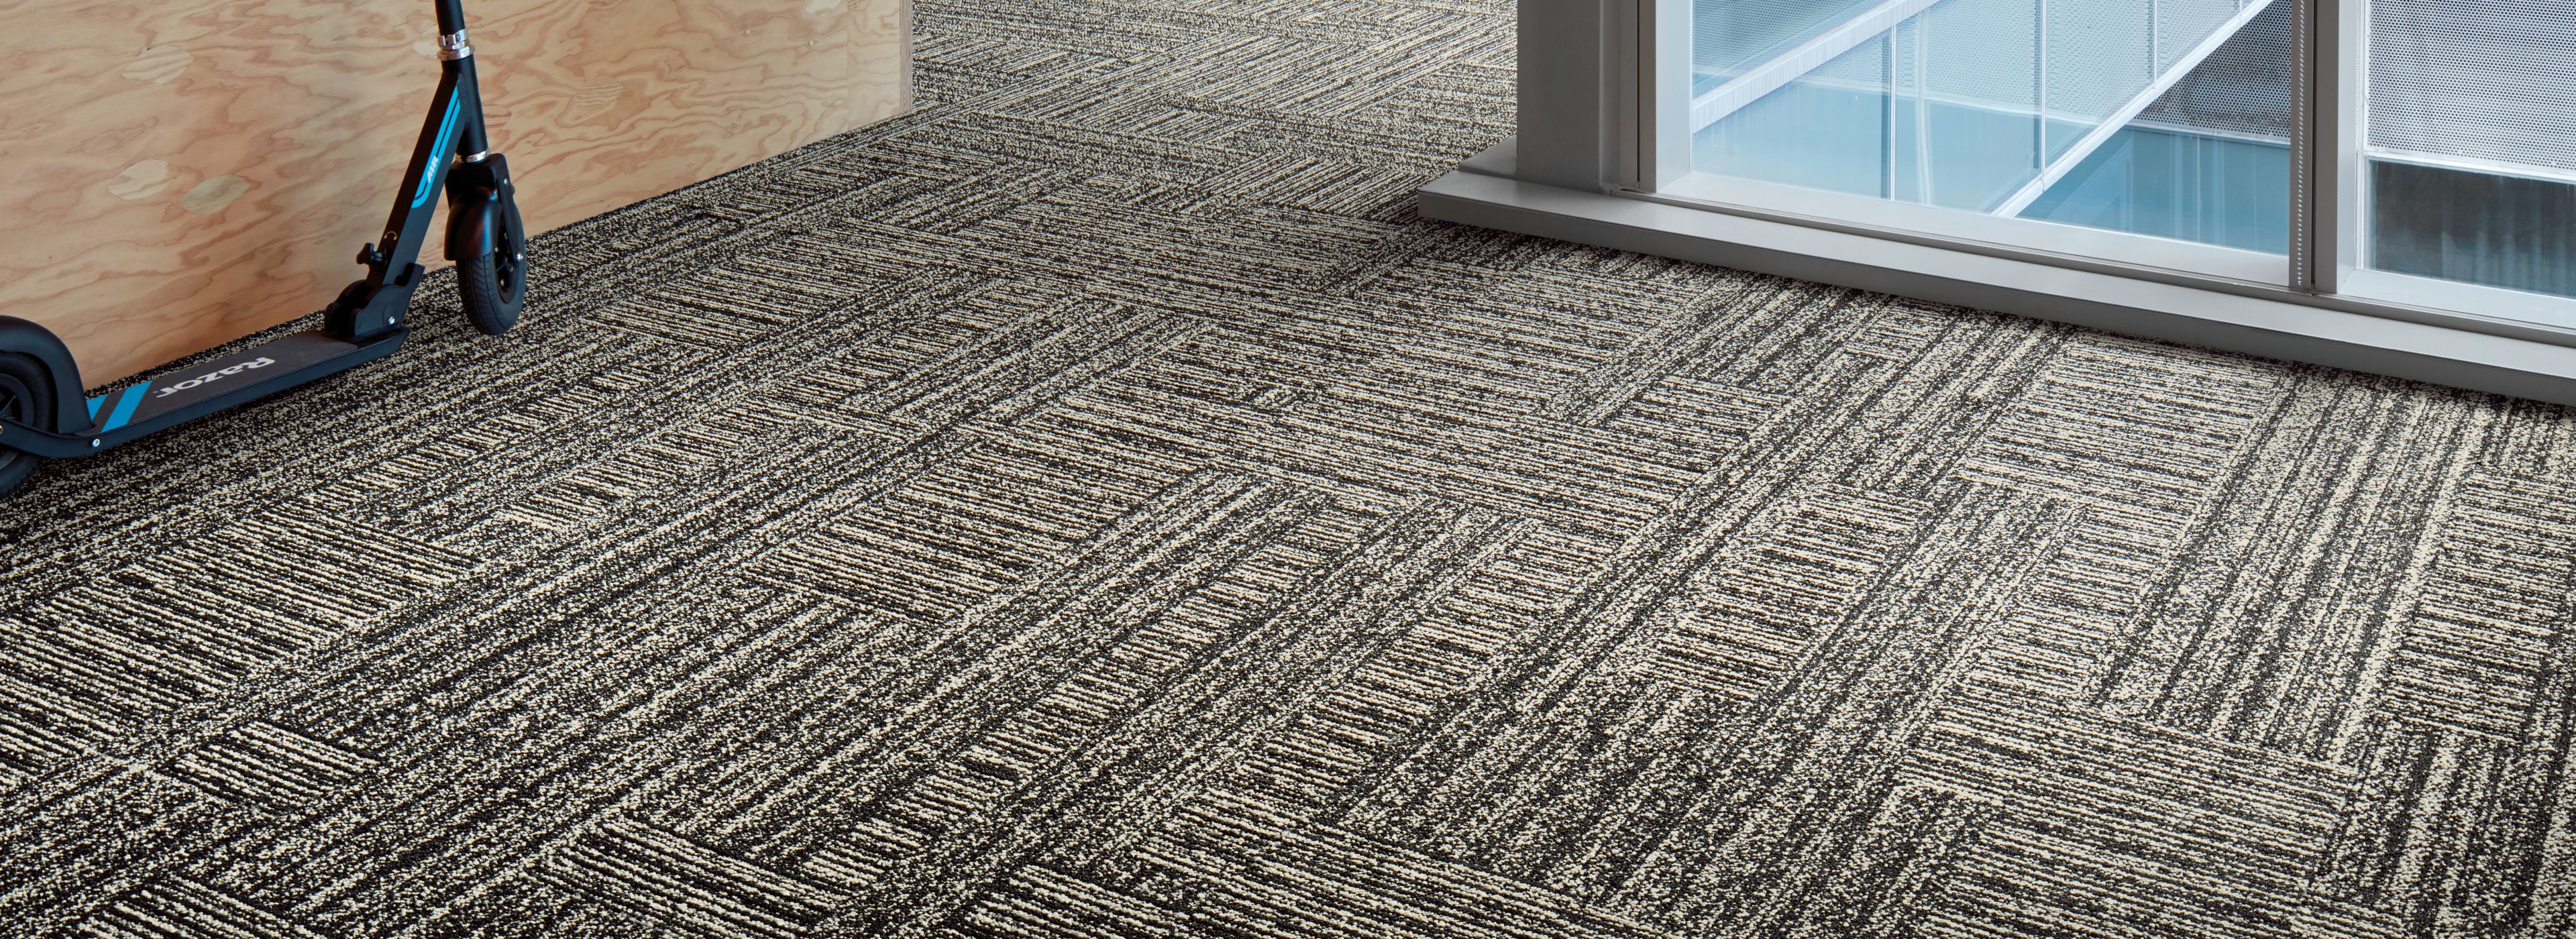 Interface Decibel and Hard Drive plank carpet tile in small area with glass windows Bildnummer 1